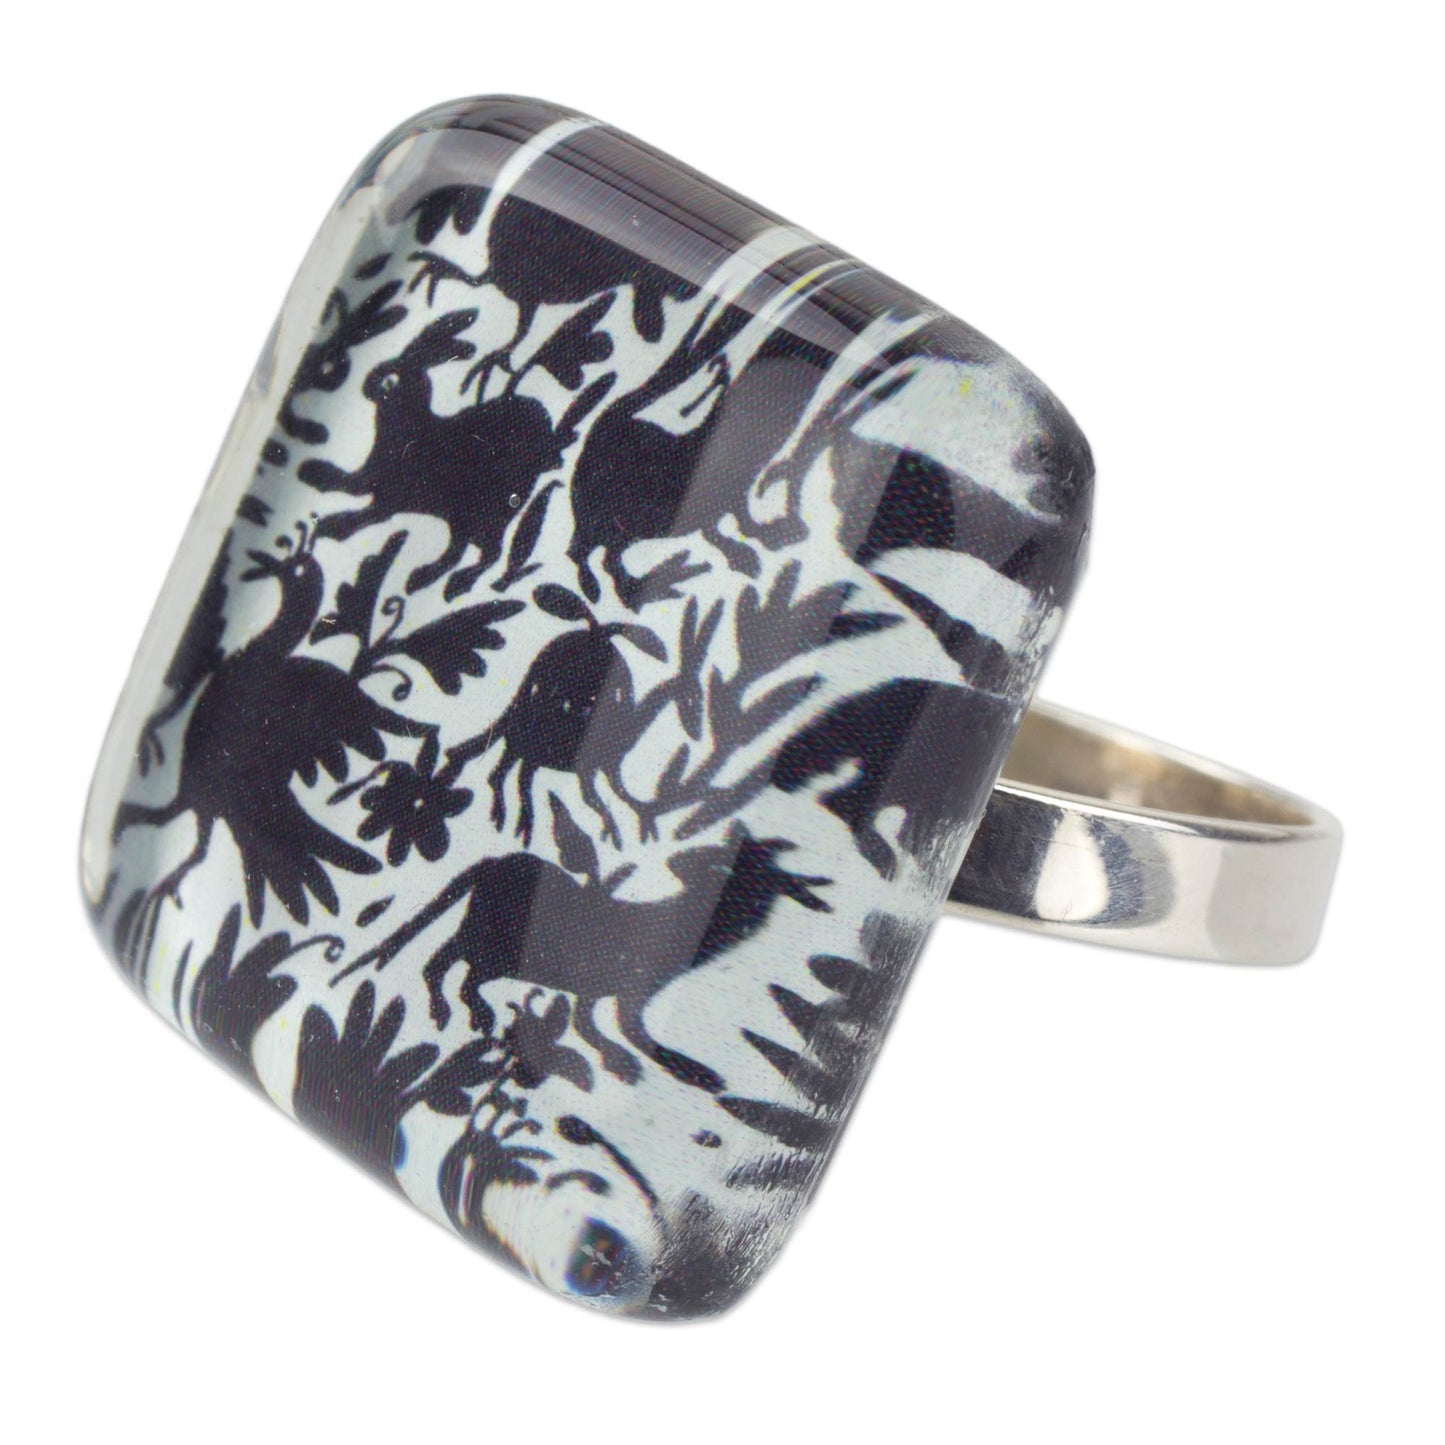 'Tenango Wonder' Black and White Hand Crafted Art Glass Silver Cocktail Ring